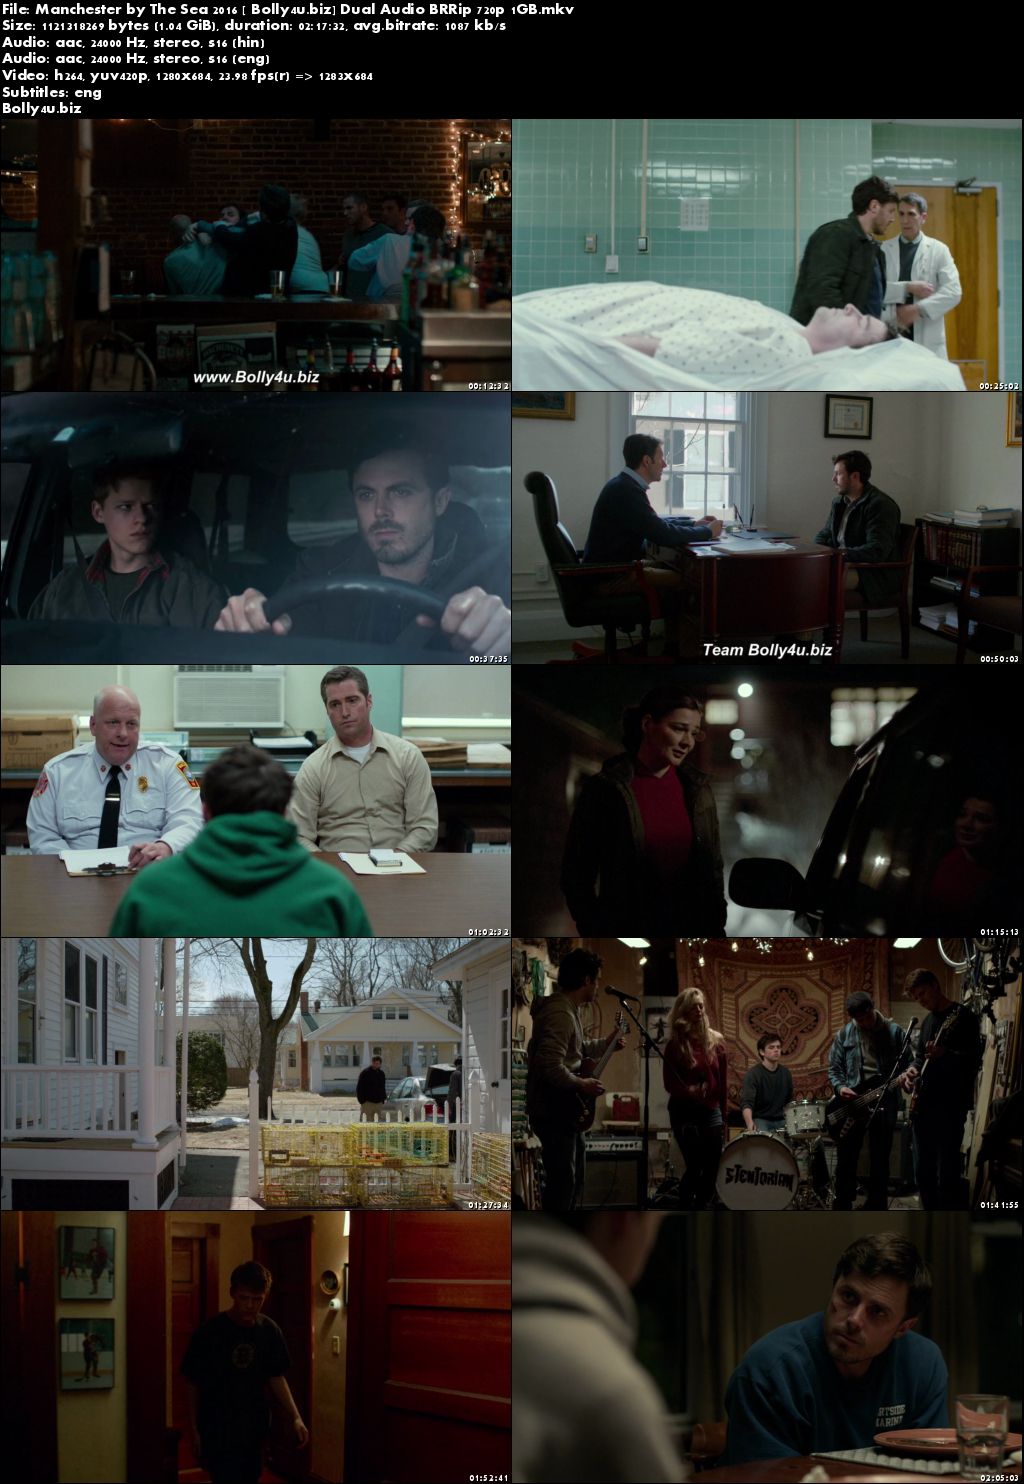 Manchester by The Sea 2016 BRRip 1Gb Hindi Dual Audio ORG 720p Download